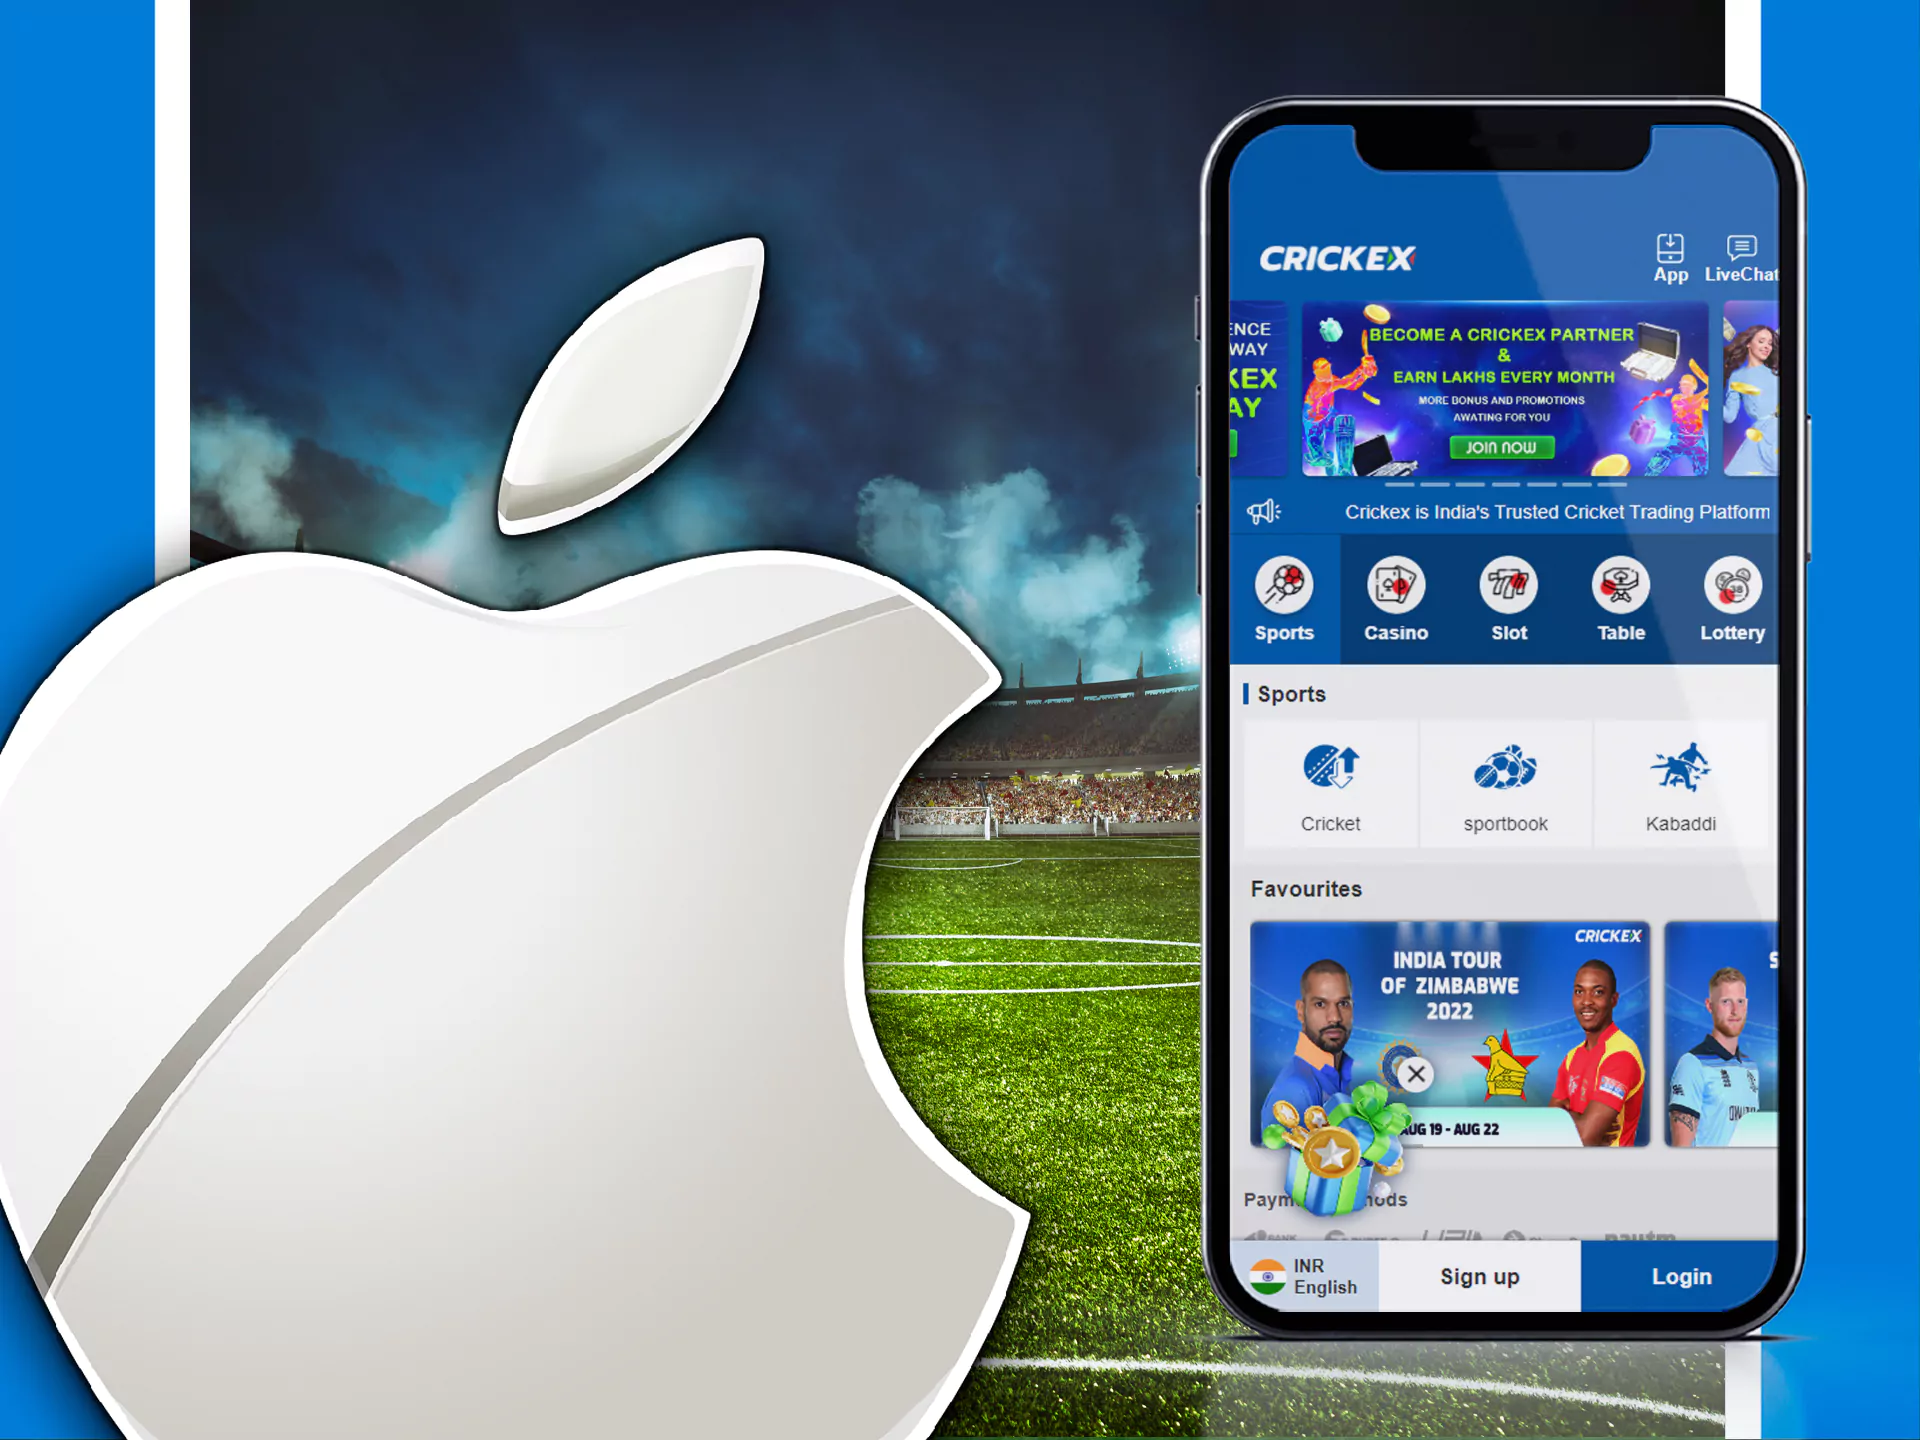 Users of iOS devices can bet via the mobile version of the Crickrx website.